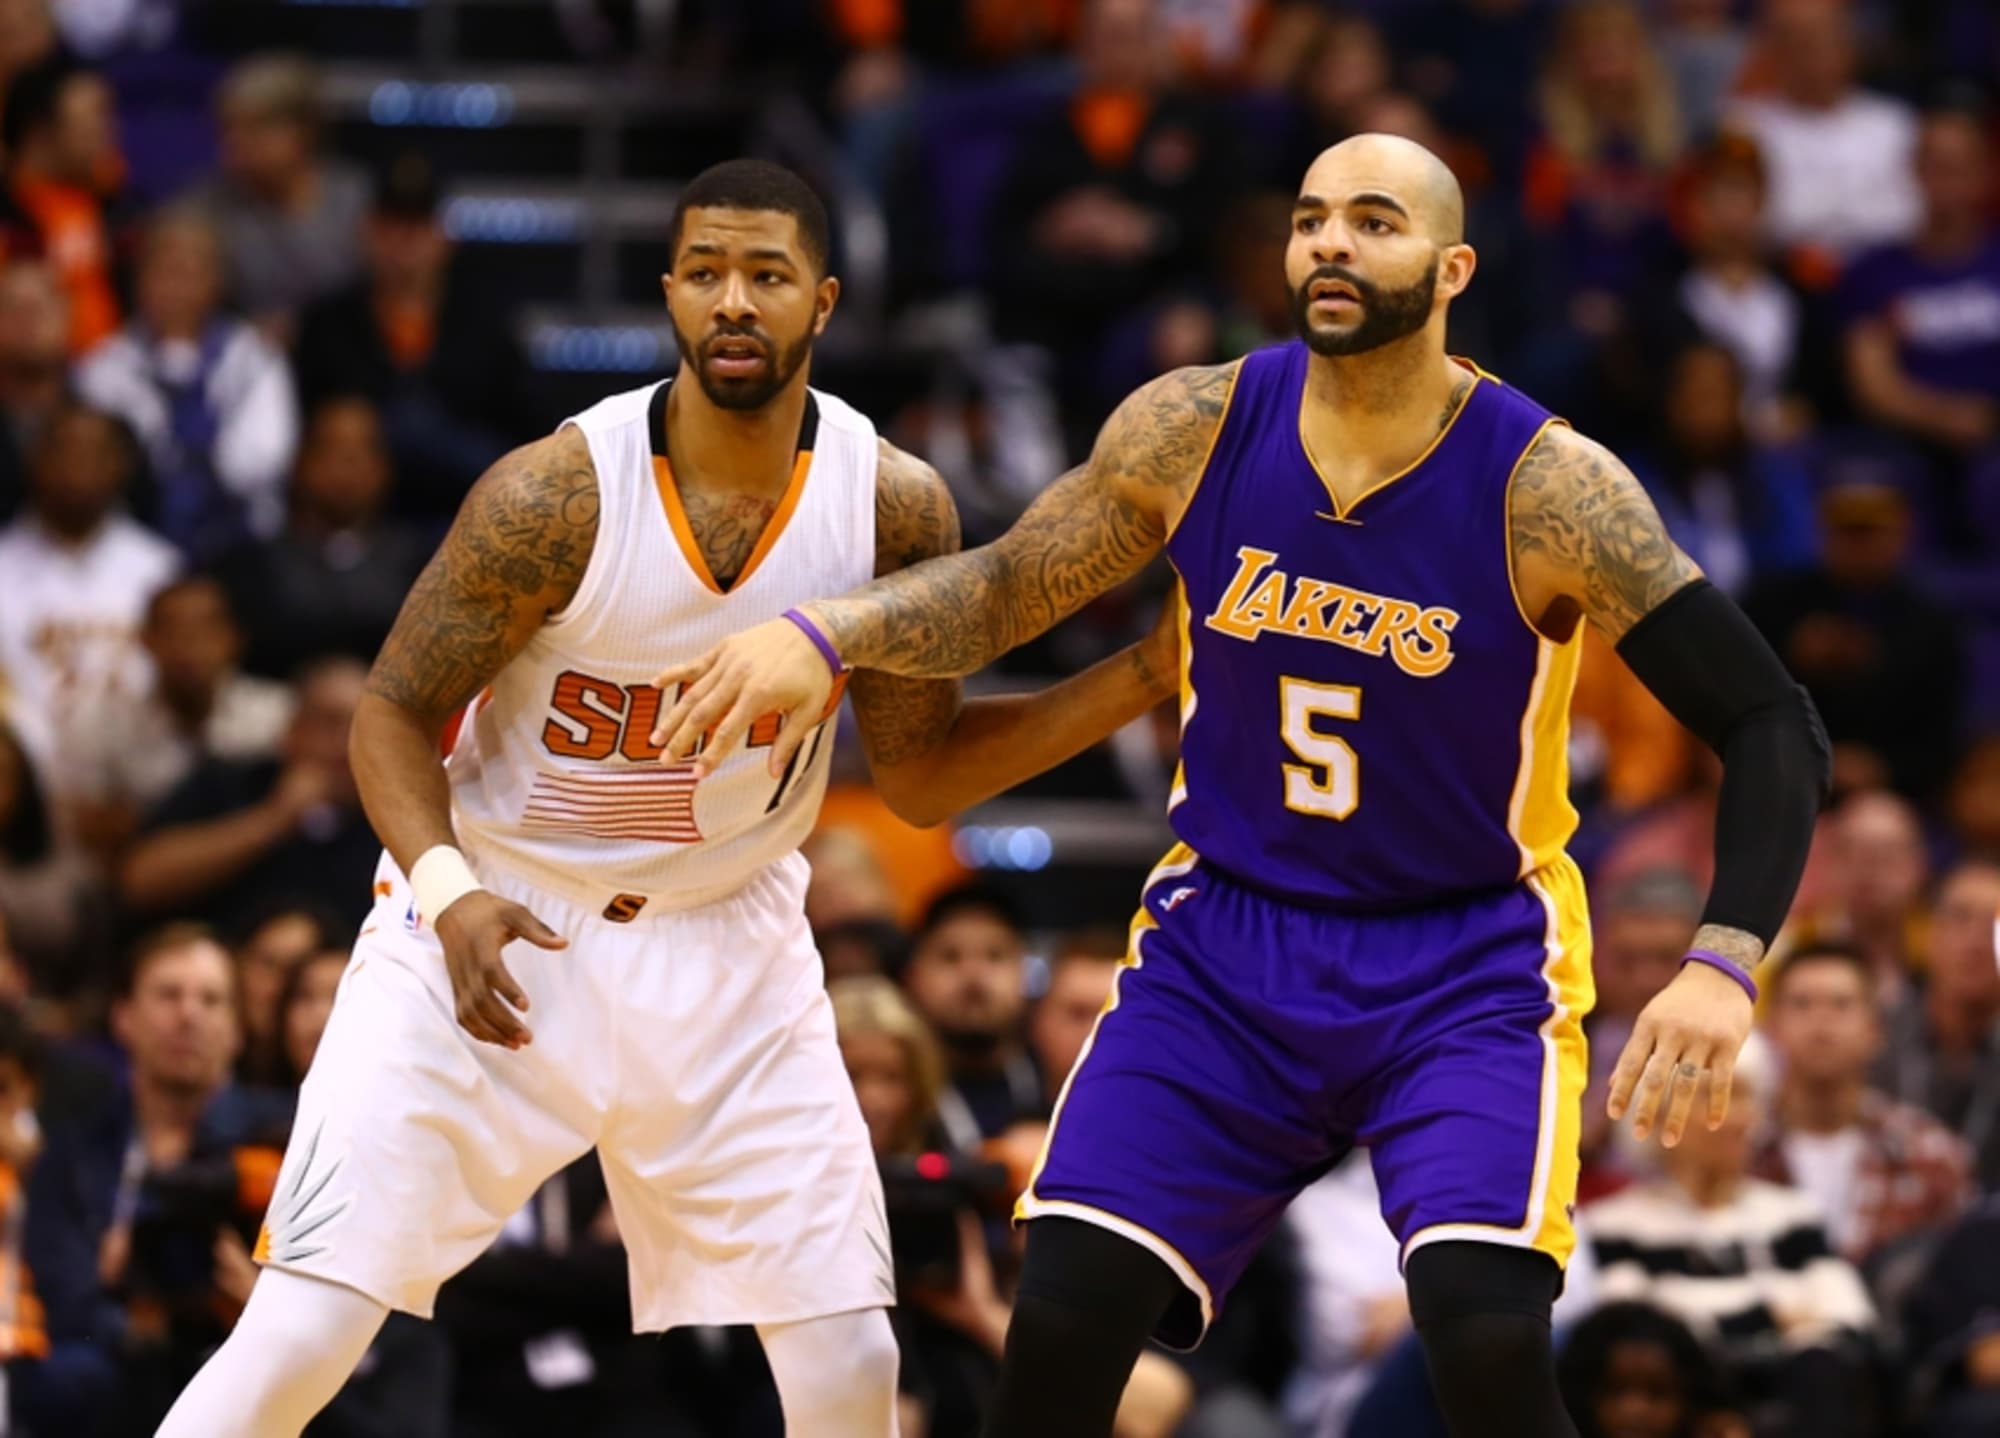 Carlos Boozer's 'what could've been' season with the Lakers